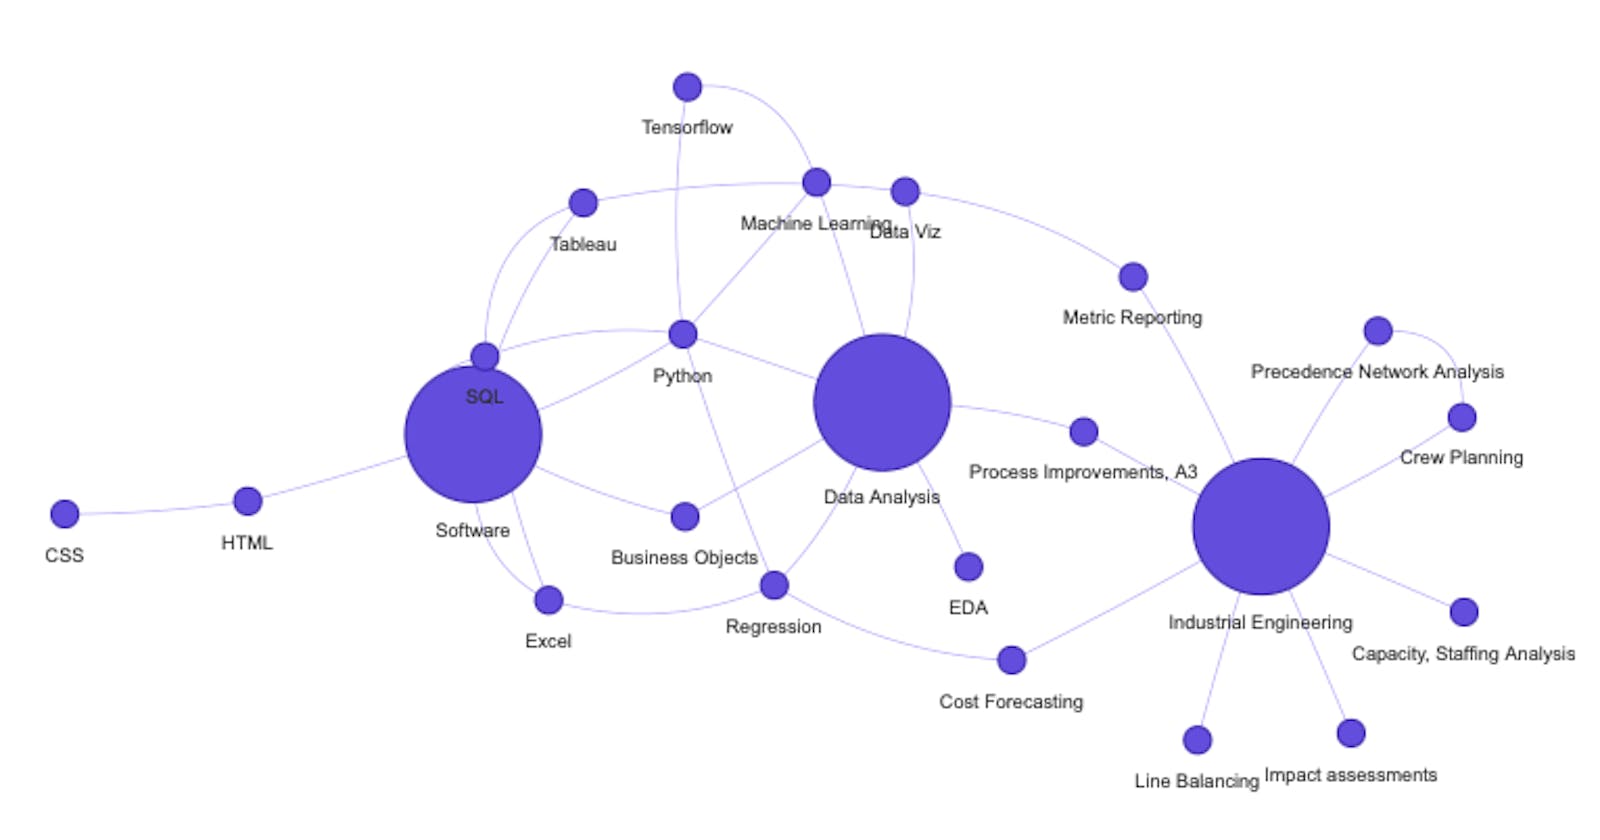 Creating Network Diagrams using PyVis